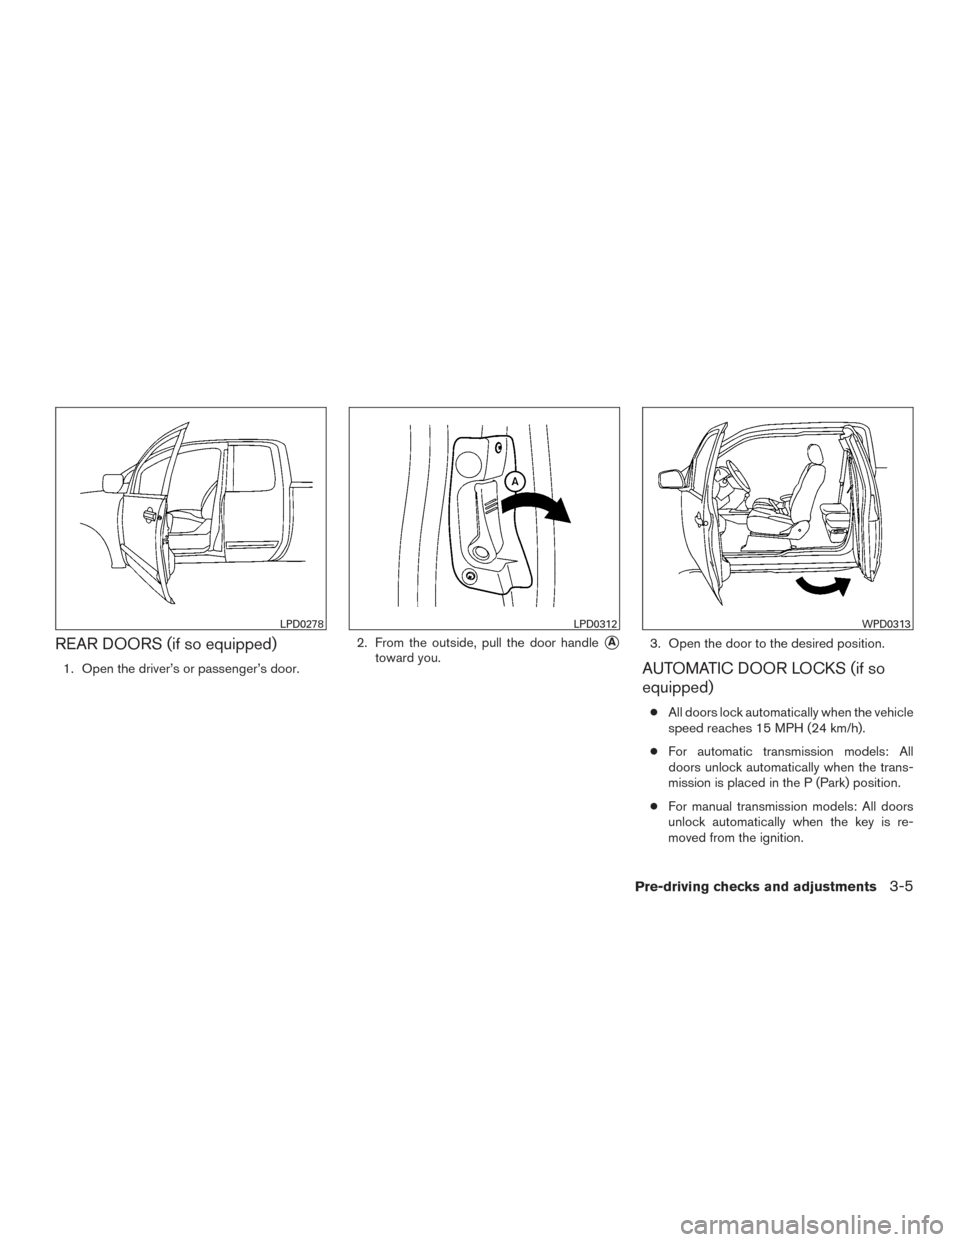 NISSAN FRONTIER 2015 D23 / 3.G User Guide REAR DOORS (if so equipped)
1. Open the driver’s or passenger’s door.2. From the outside, pull the door handle
A
toward you.
3. Open the door to the desired position.AUTOMATIC DOOR LOCKS (if so
e